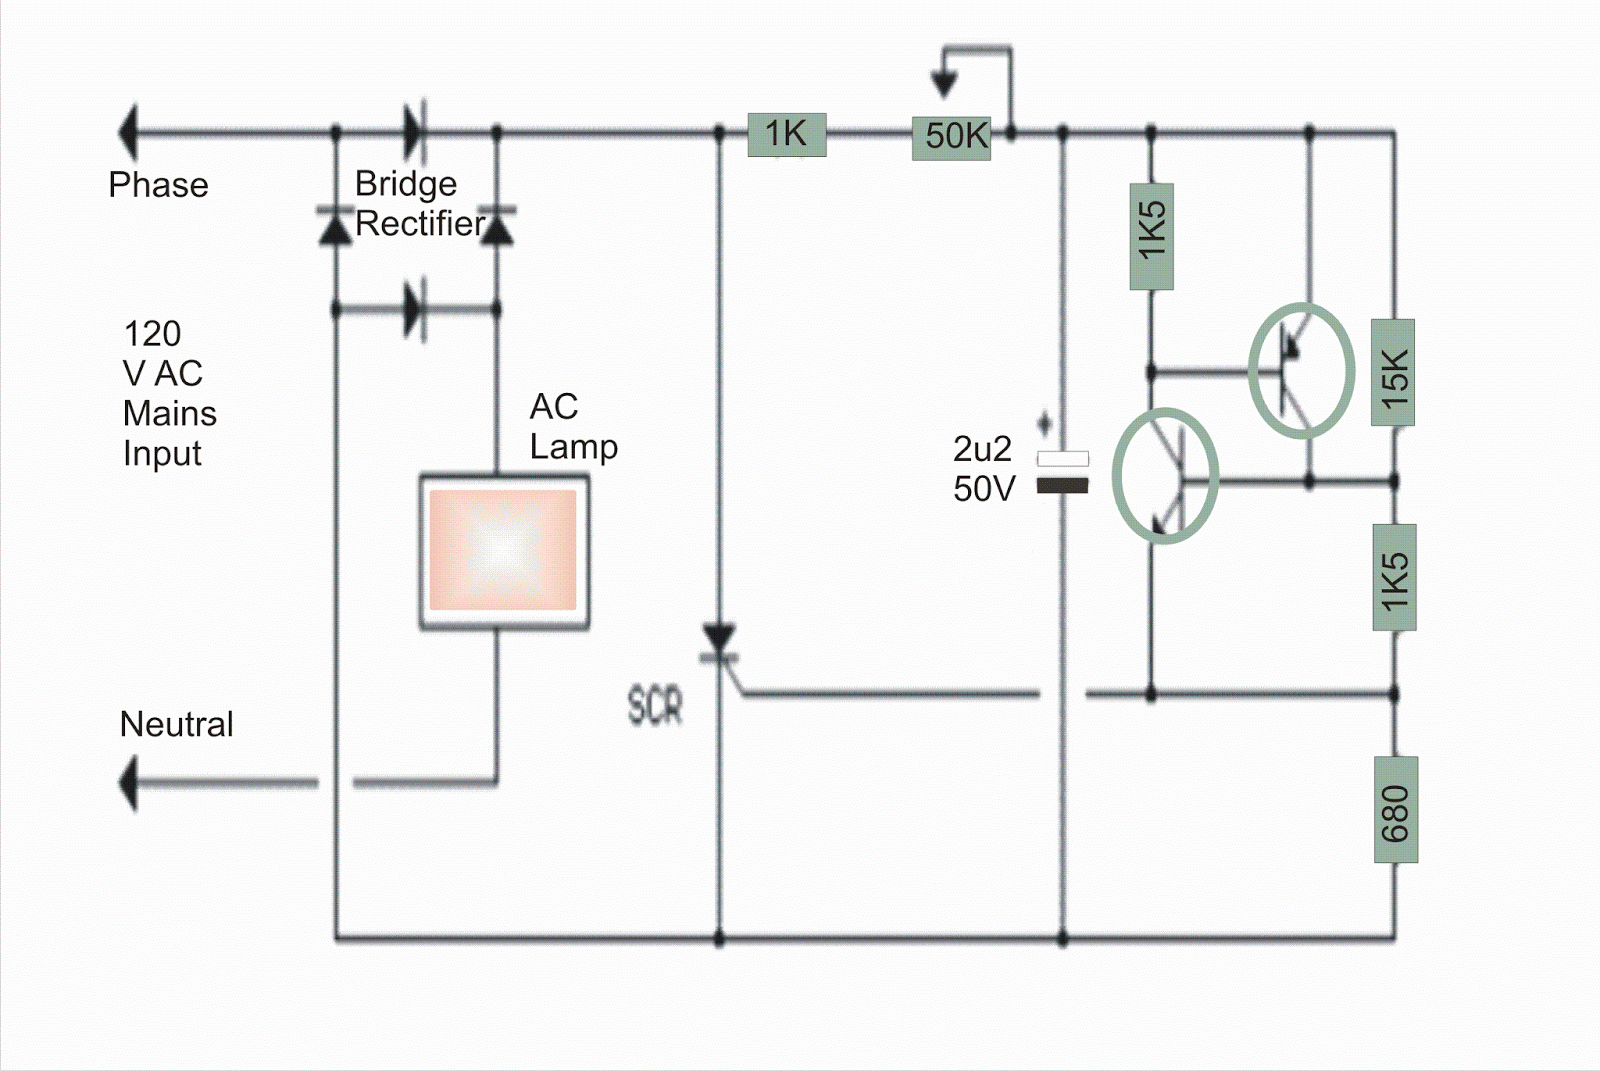 Electronics Projects: 120 VAC Lamp Dimmer Circuit